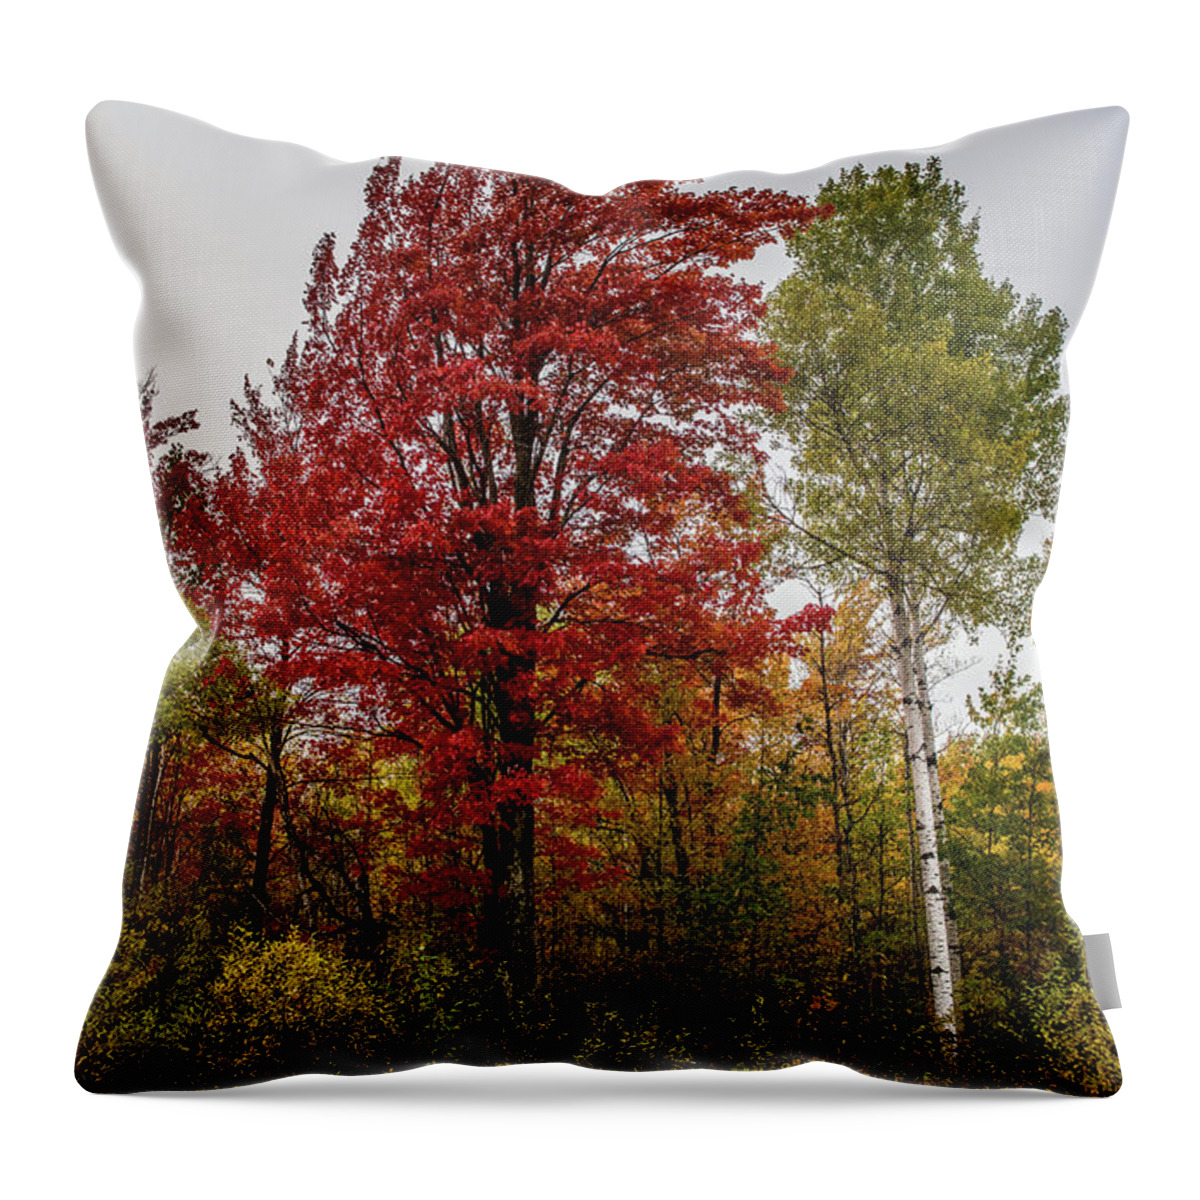 Fall Throw Pillow featuring the photograph Fall Maple by Paul Freidlund